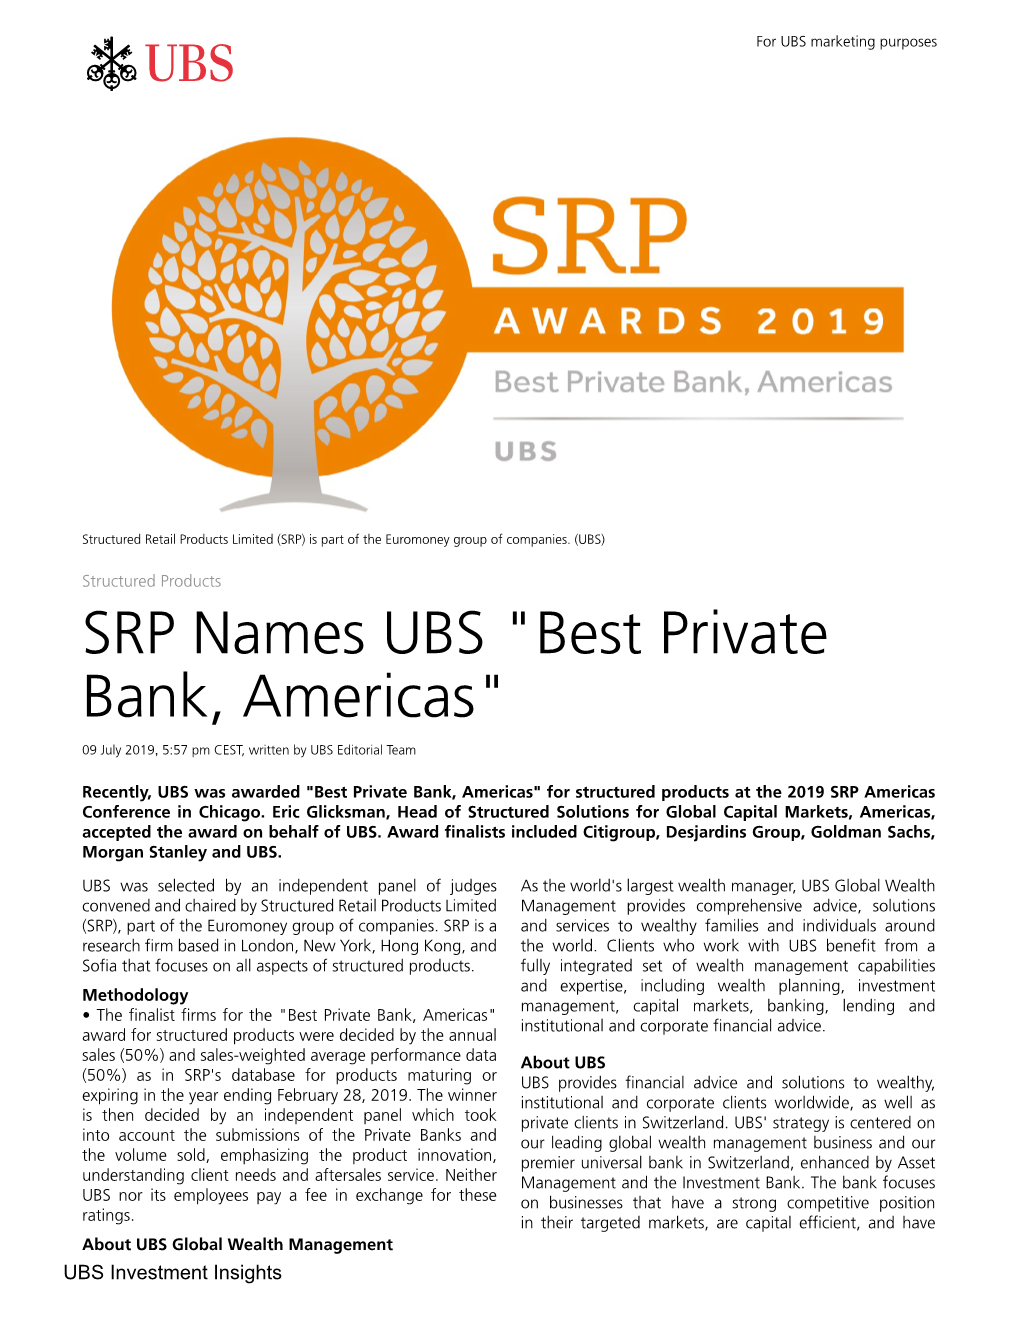 SRP Names UBS "Best Private Bank, Americas"